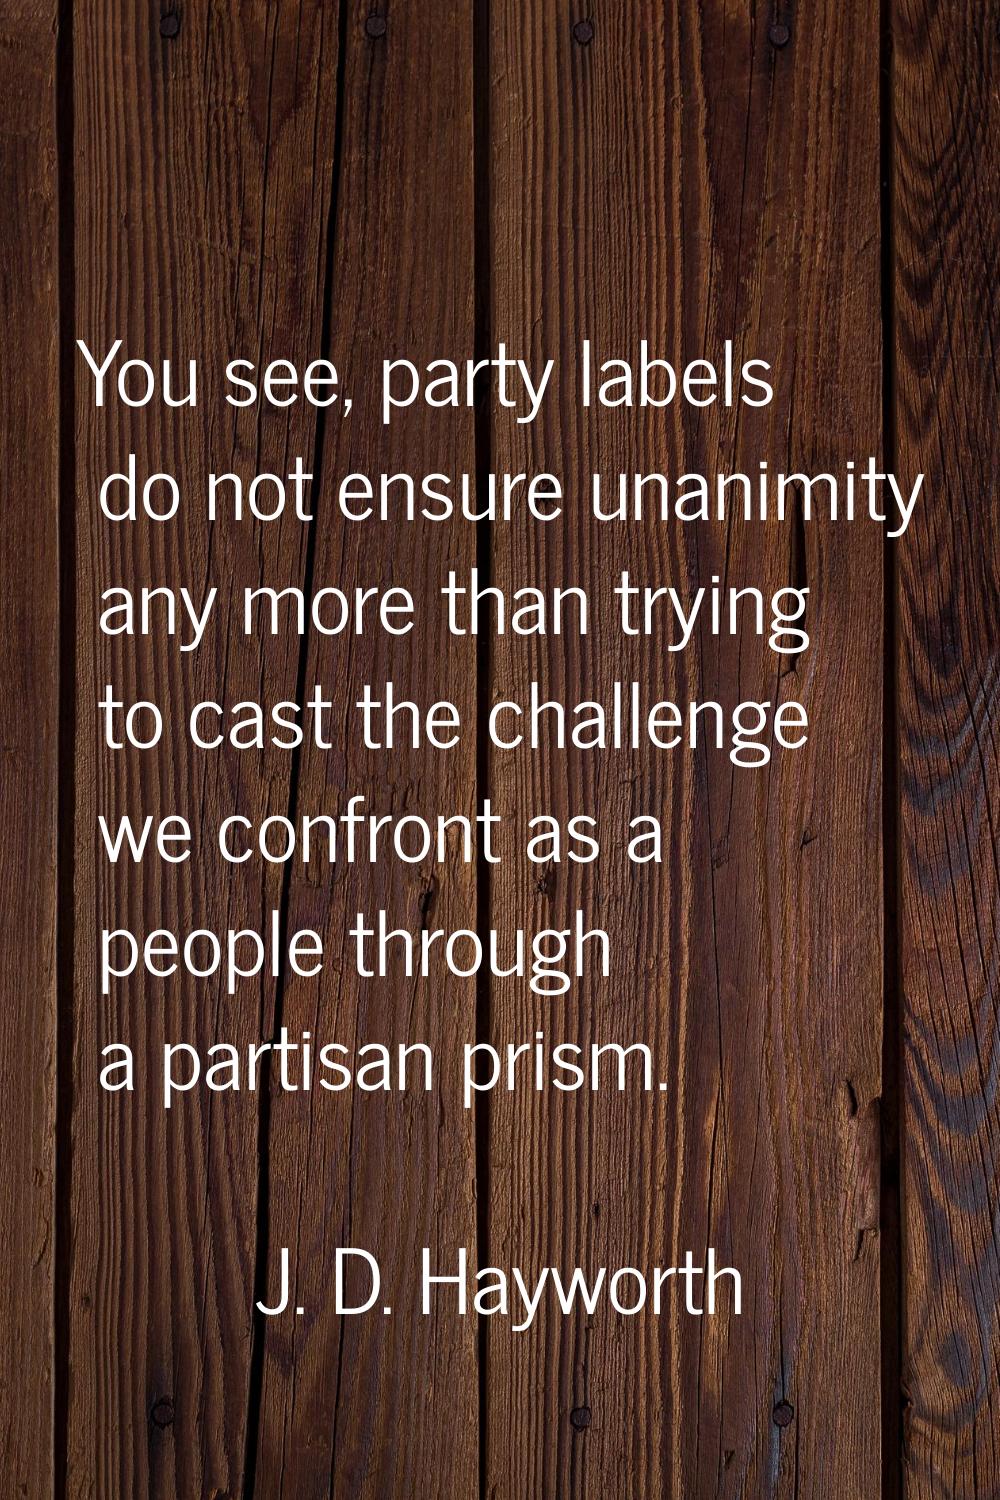 You see, party labels do not ensure unanimity any more than trying to cast the challenge we confron